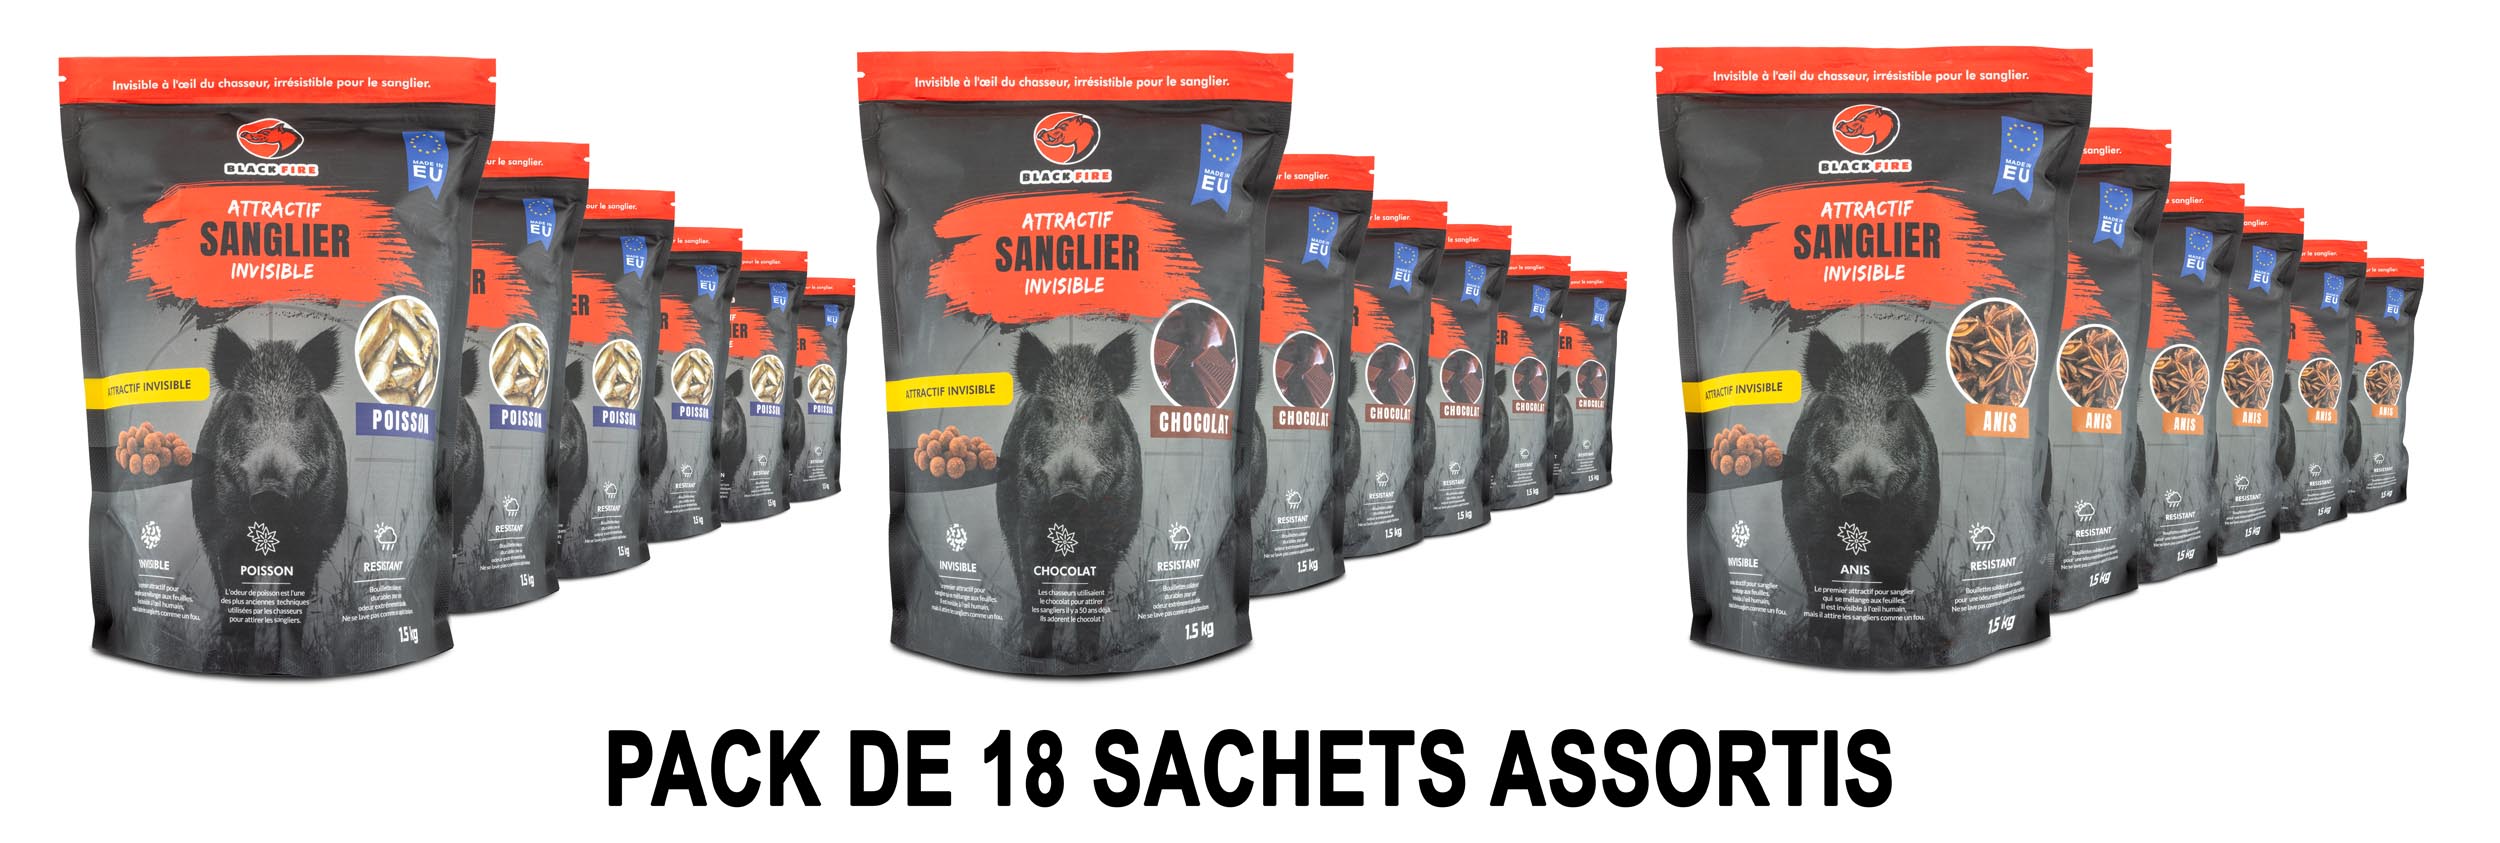 PACK 3 arômes - Attractif BLACK FIRE Invisible pour sanglier